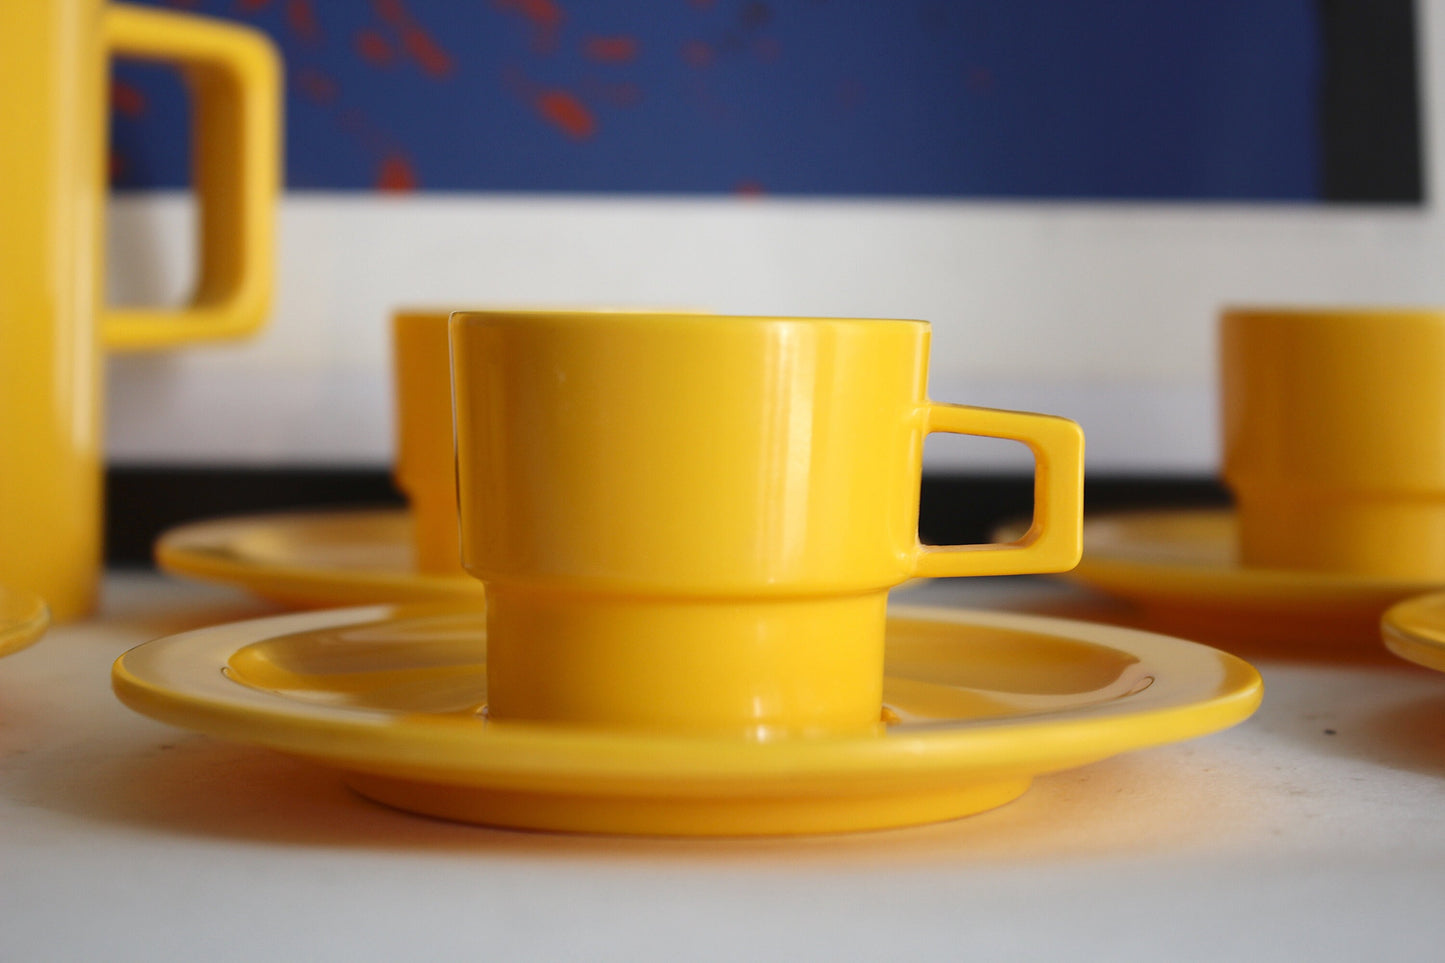 PORXELANE set of melamine coffee cups, saucers, and a matching pitcher. Efmen Spain, 1970s.